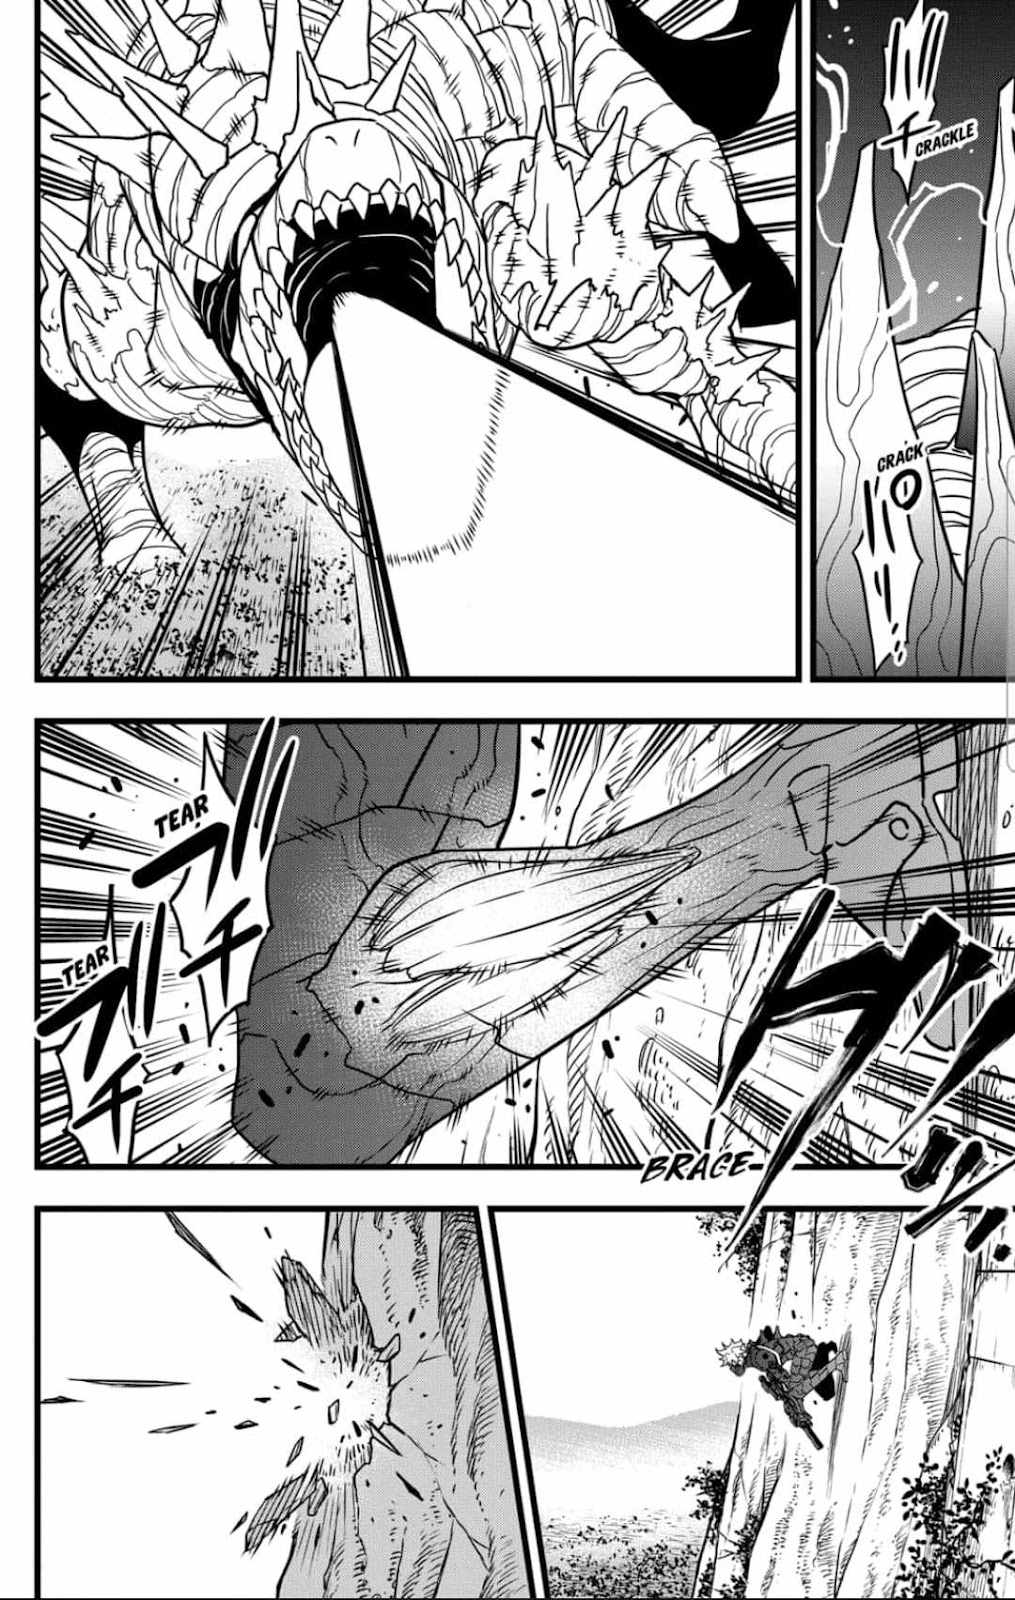 Kaiju no 8 Chapter 62, monster #8 chapter 62